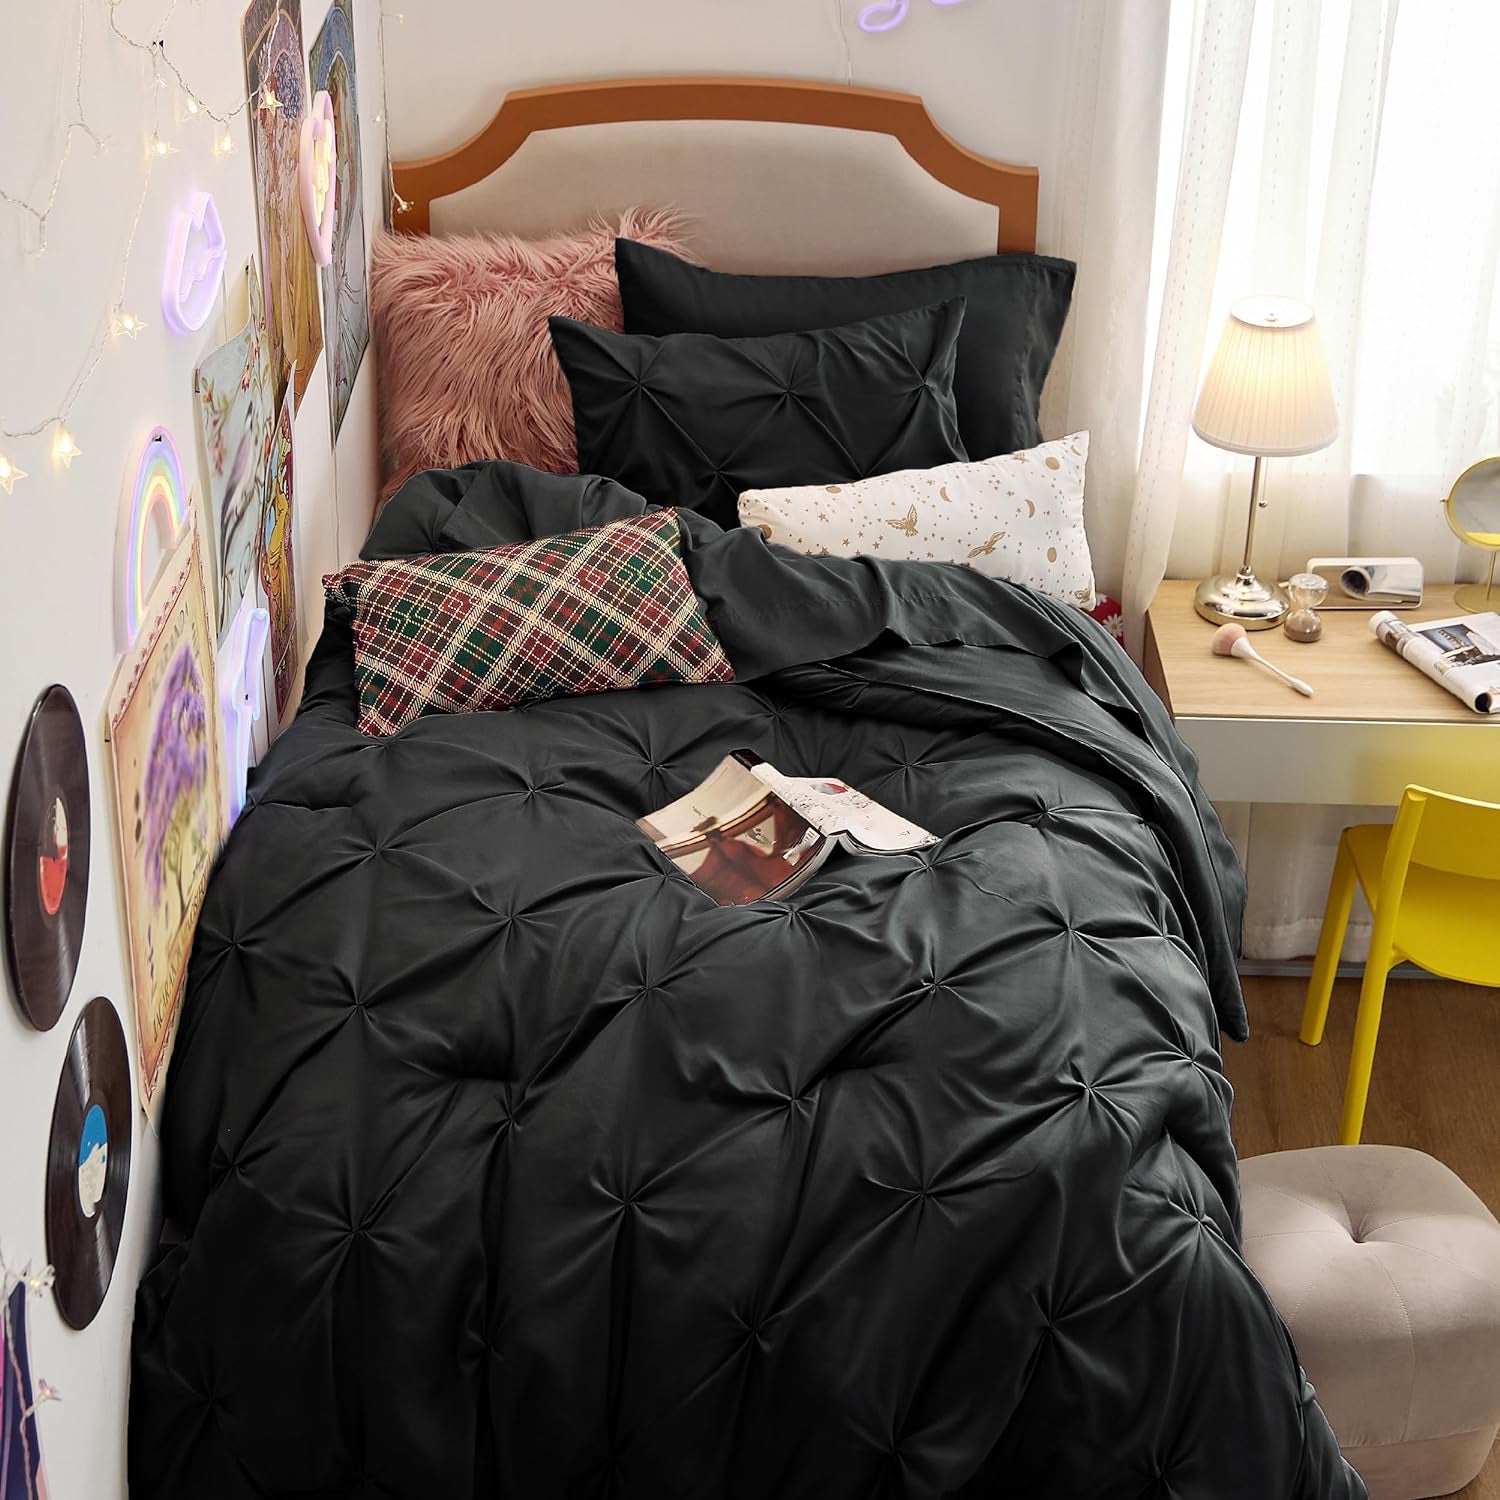 Black Twin Comforter Set with Sheets - 5 Pieces Twin Bedding Sets, Pinch Pleat Twin Bed in a Bag with Comforter, Sheets, Pillowcase & Sham